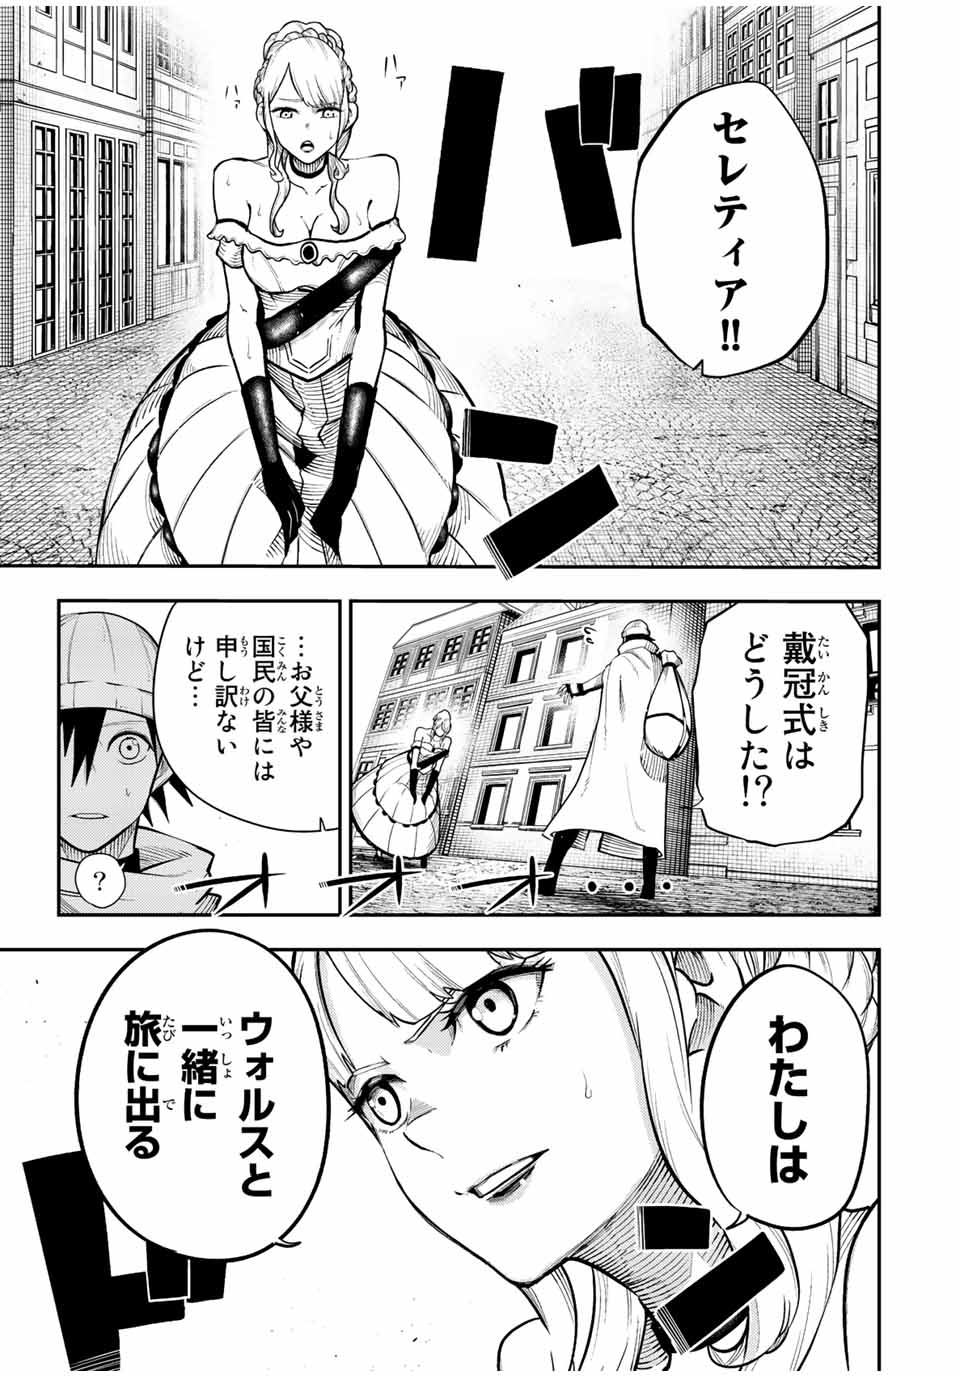 the strongest former prince-; 奴隷転生 ～その奴隷、最強の元王子につき～ 第116話 - Page 19